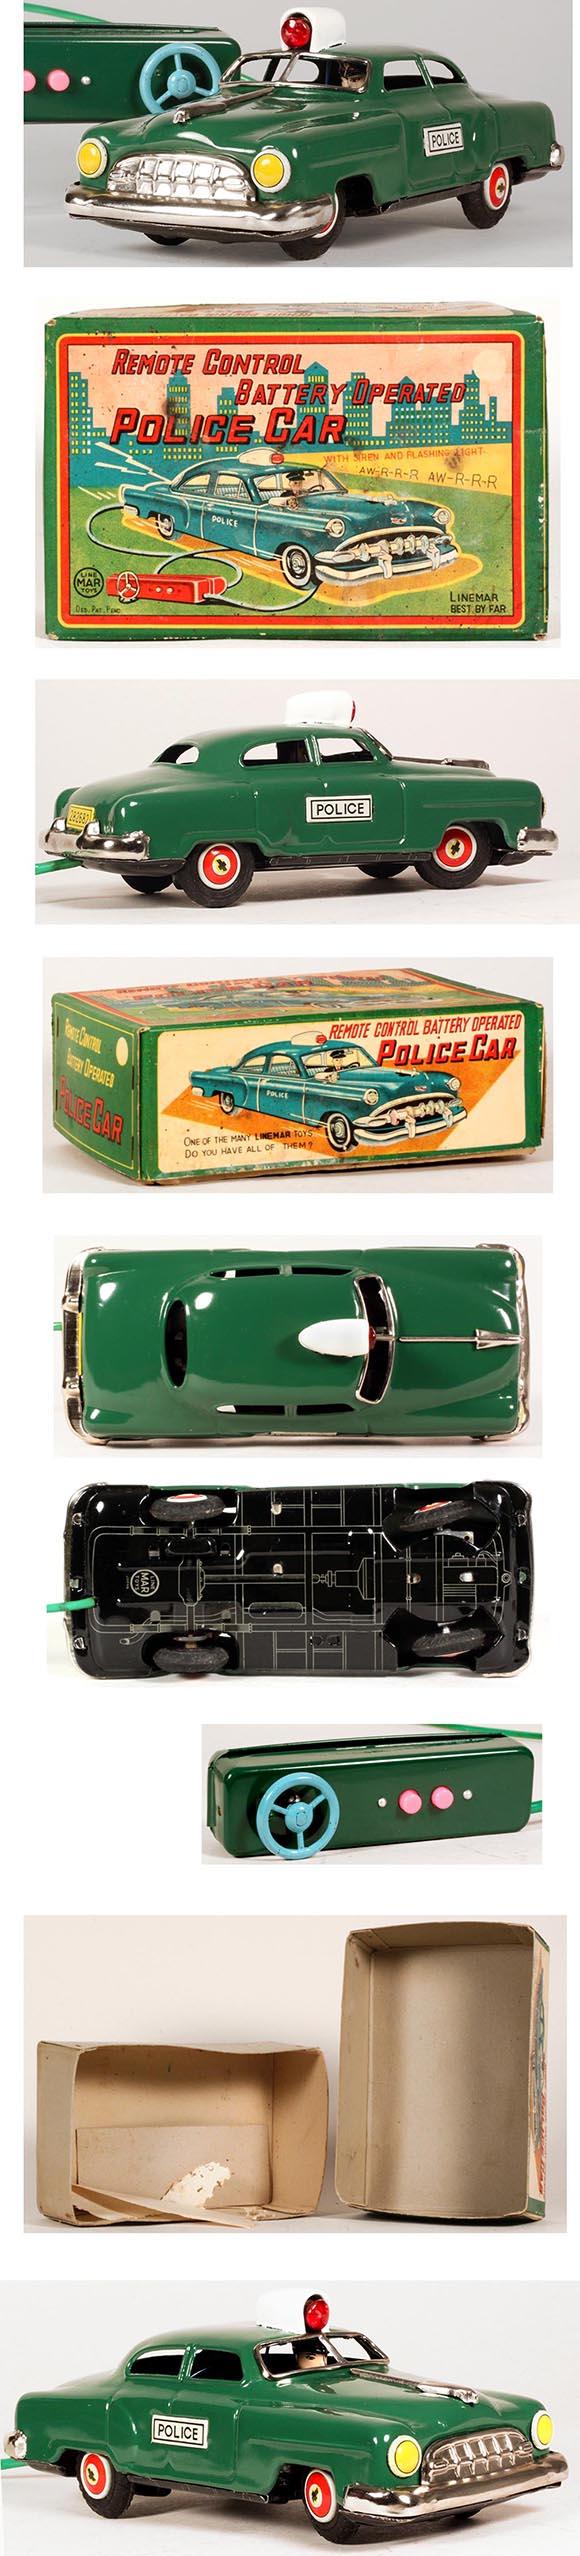 1954 Linemar, Battery Operated Chevrolet Police Car in Original Box